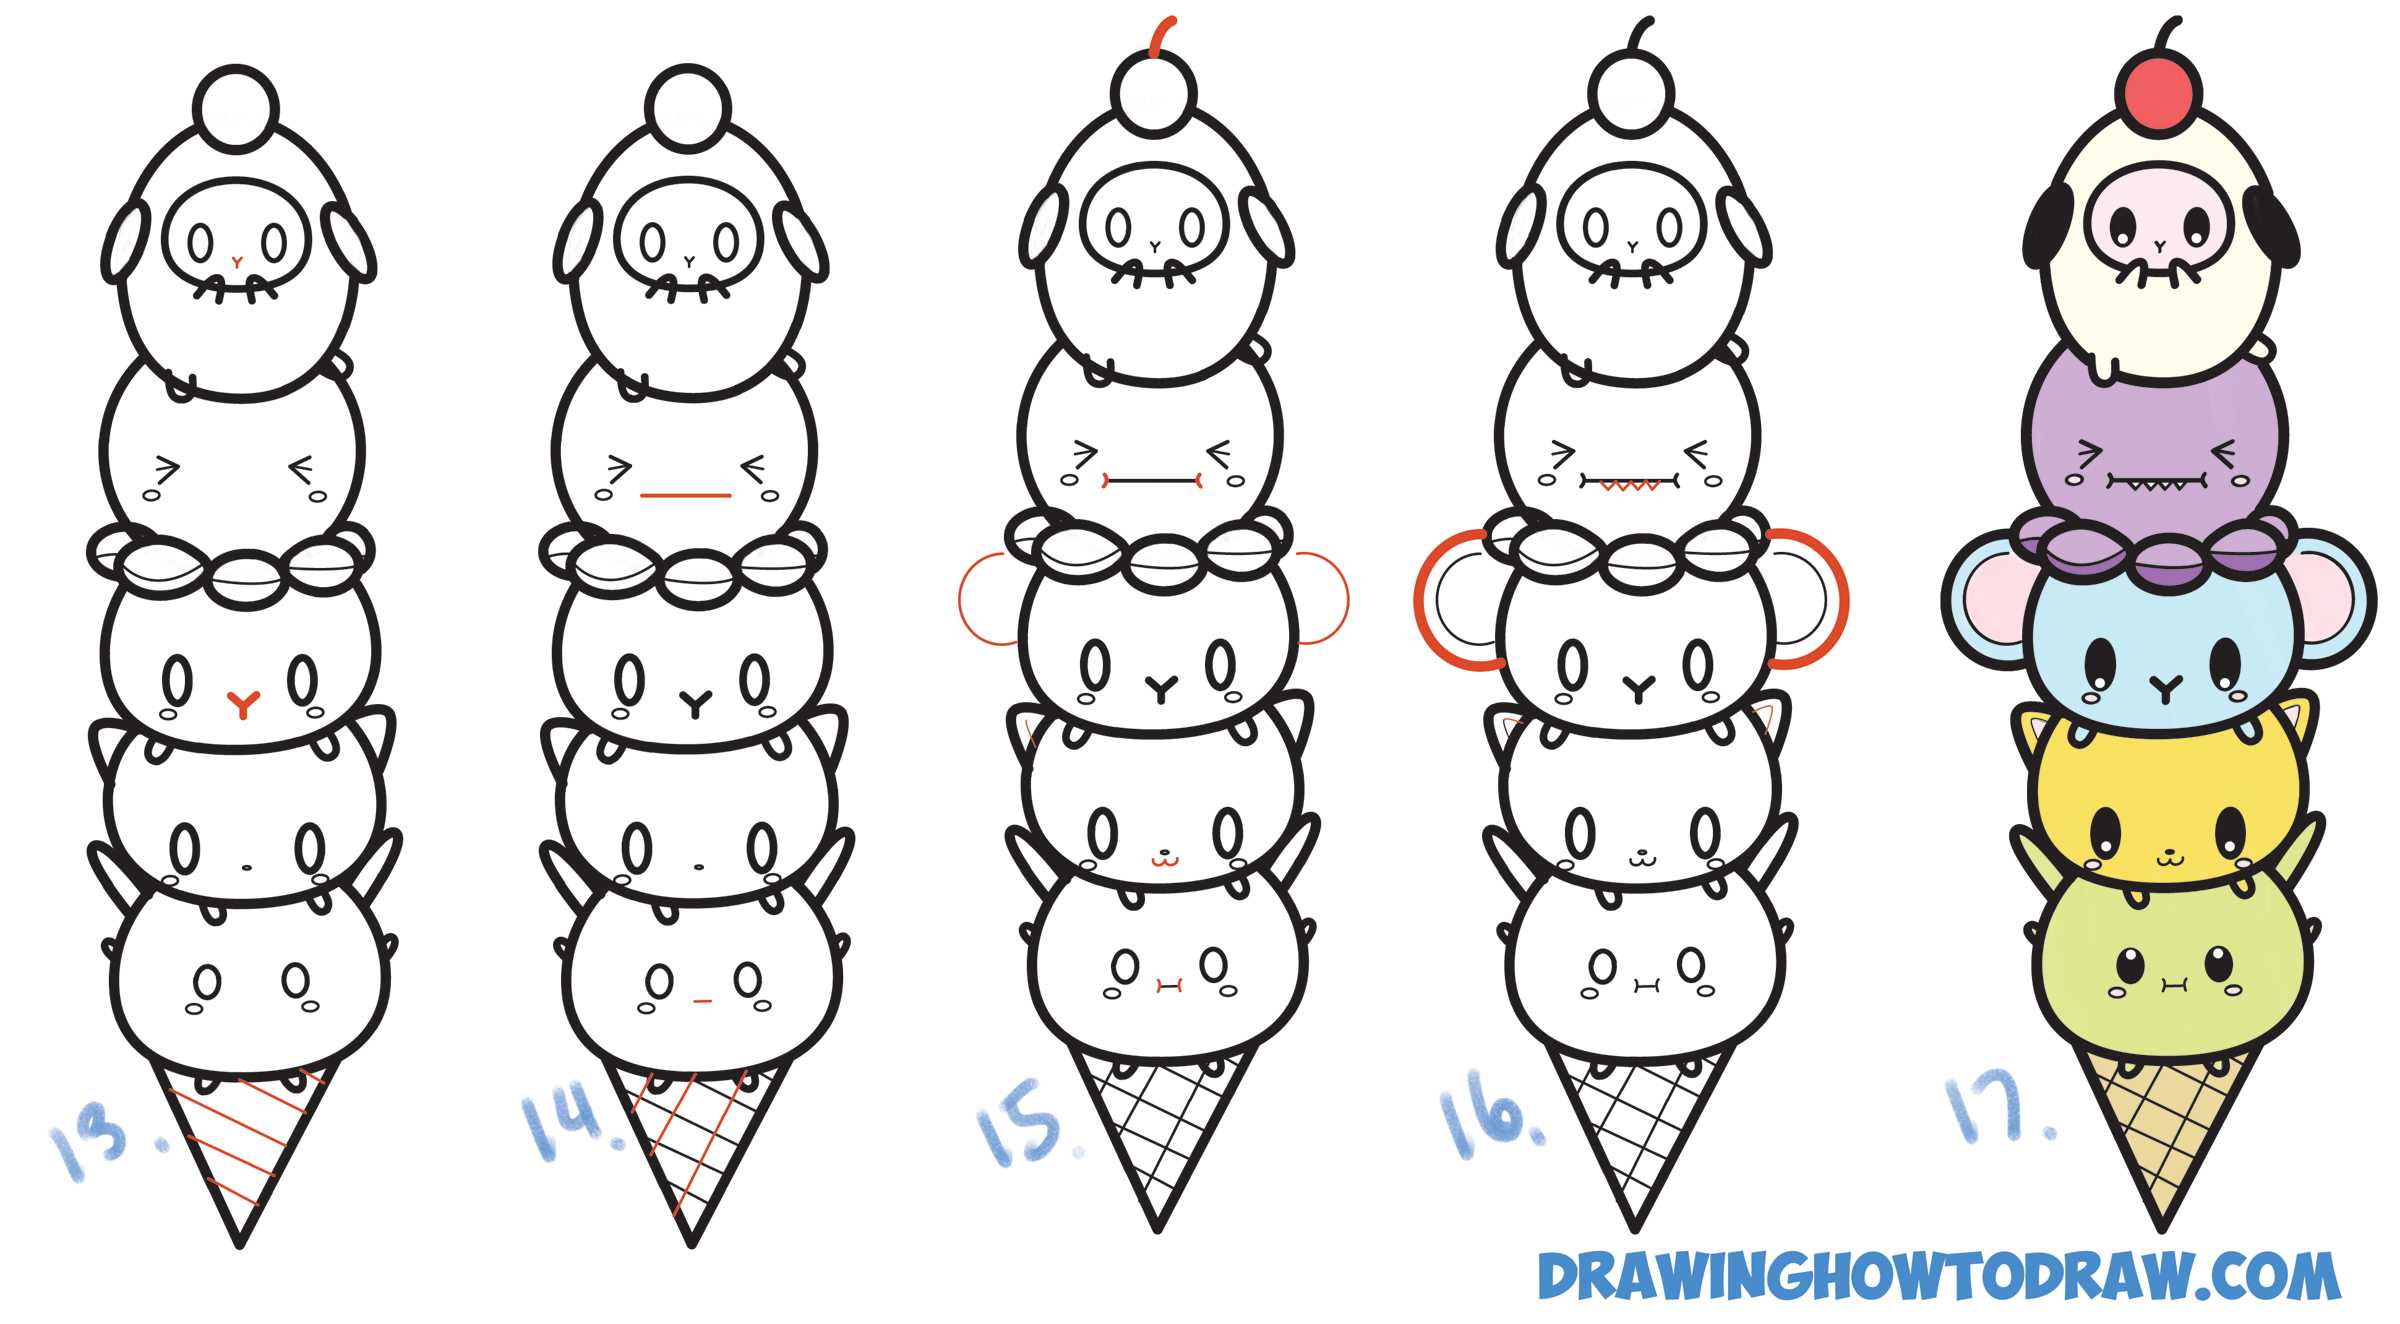 Easy Guide to Drawing Kawaii Characters : Part 2 : How to Draw Kawaii  Animals & Critters, Expressions, Faces, Body Poses | How to Draw Step by  Step Drawing Tutorials